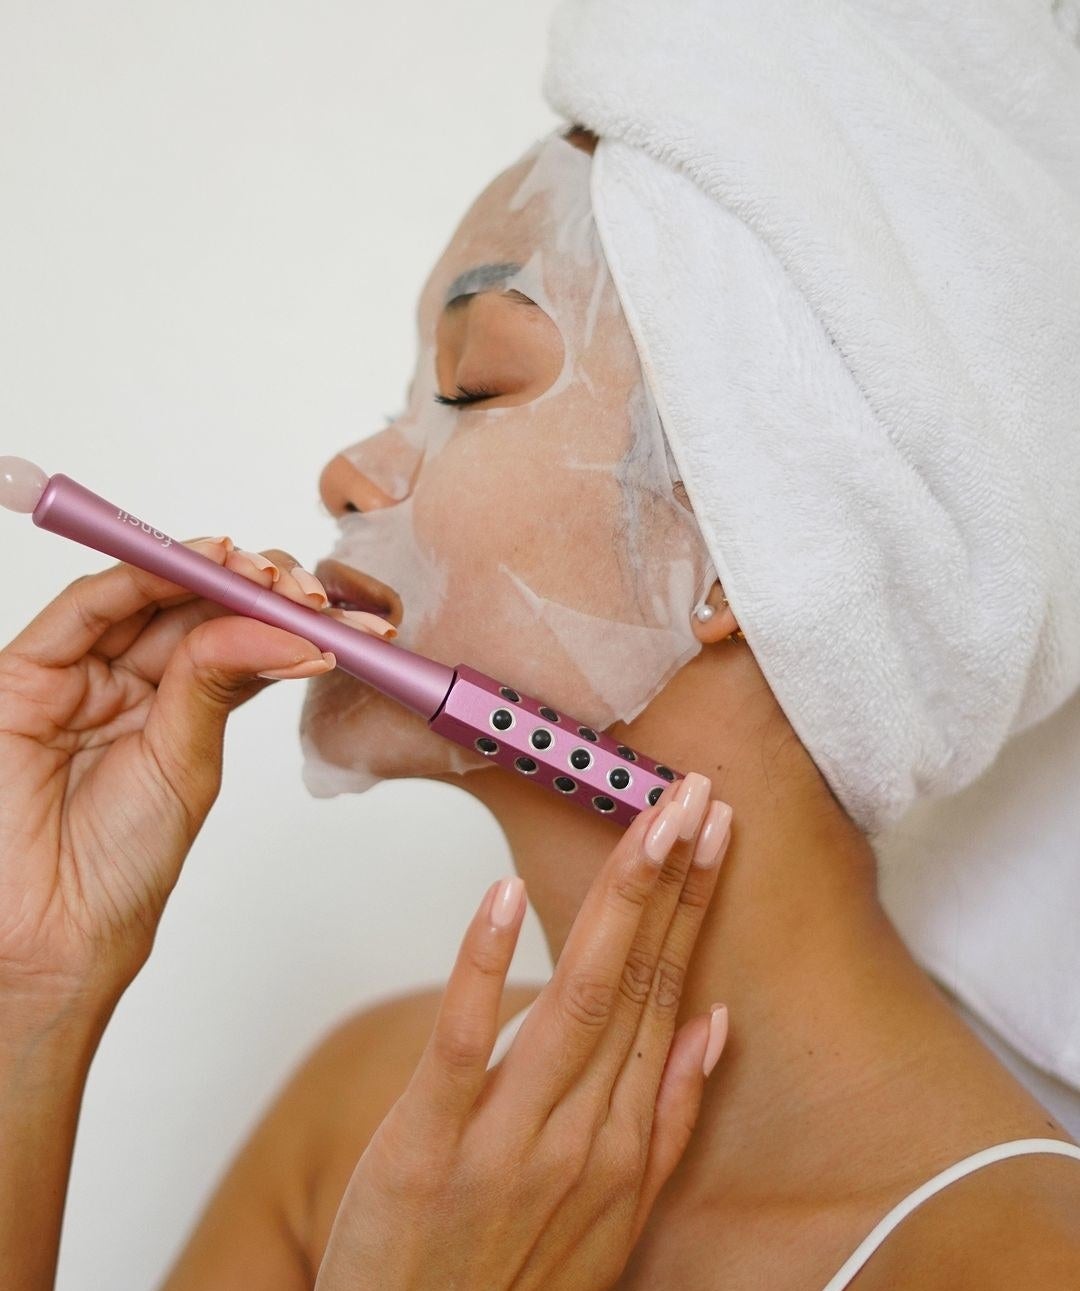 a person rolling the wand over a sheet mask on their face